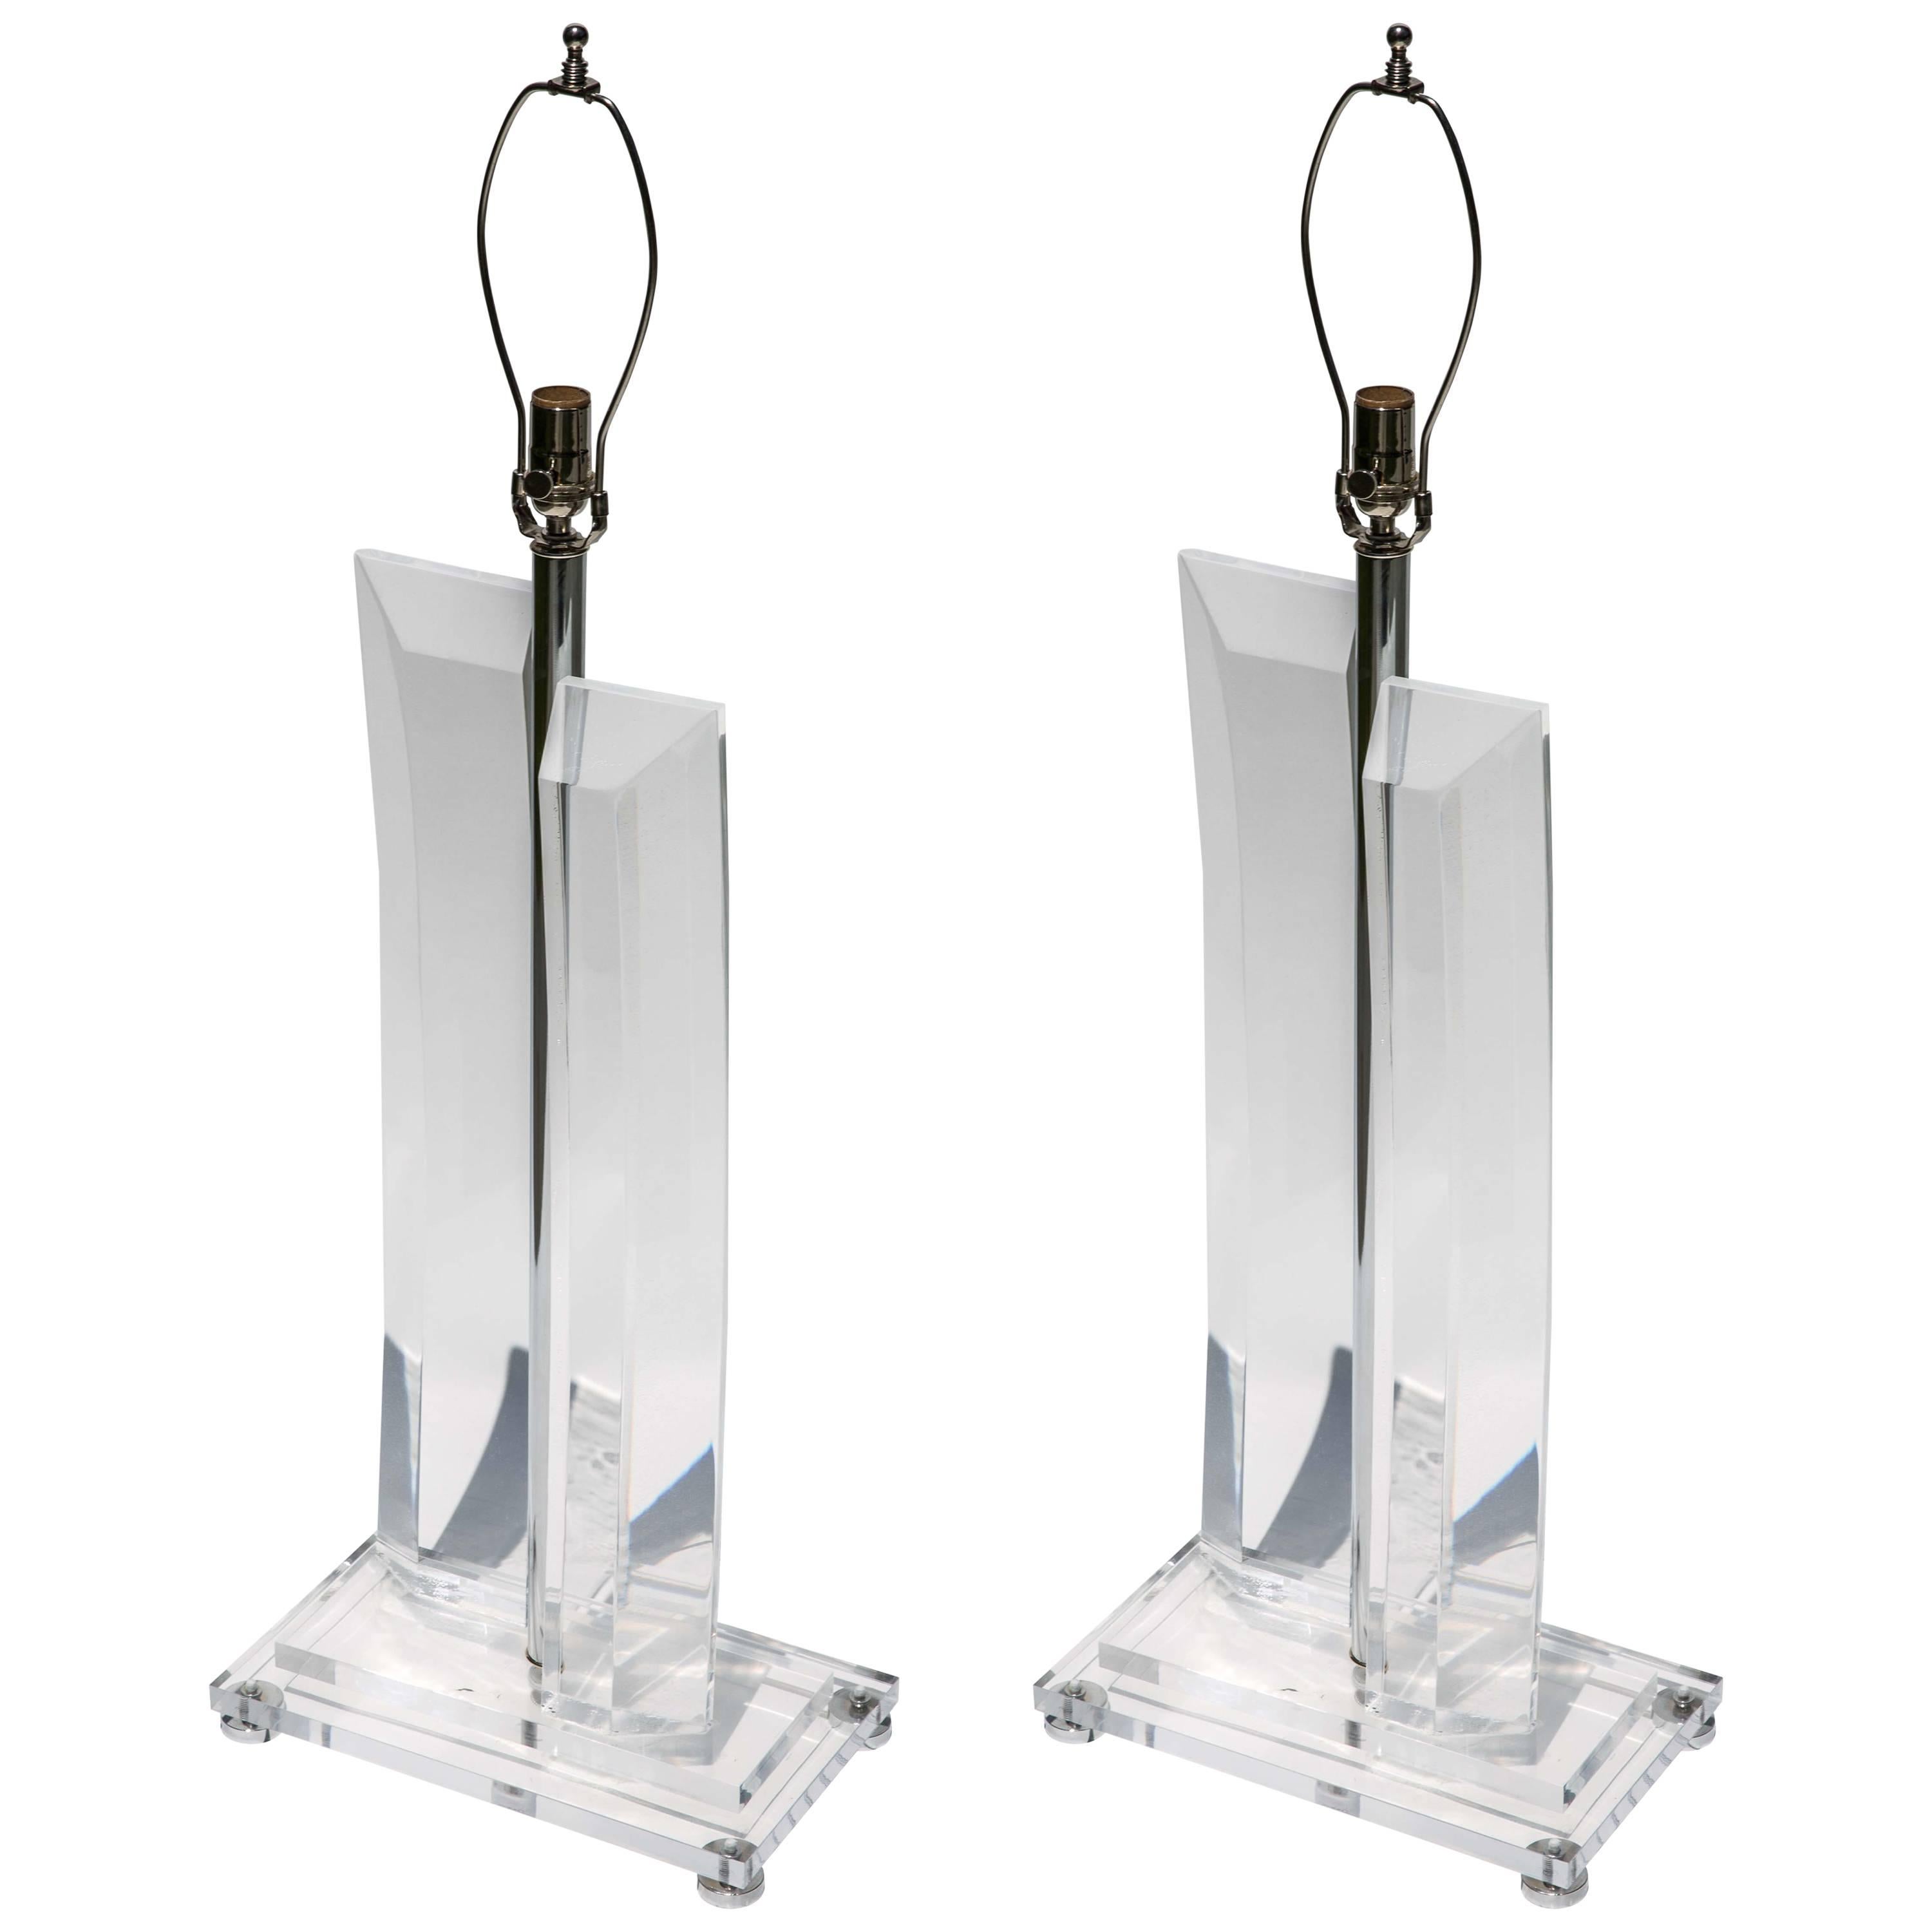 Pair of Tall Faceted Lucite Lamps with Nickel Details